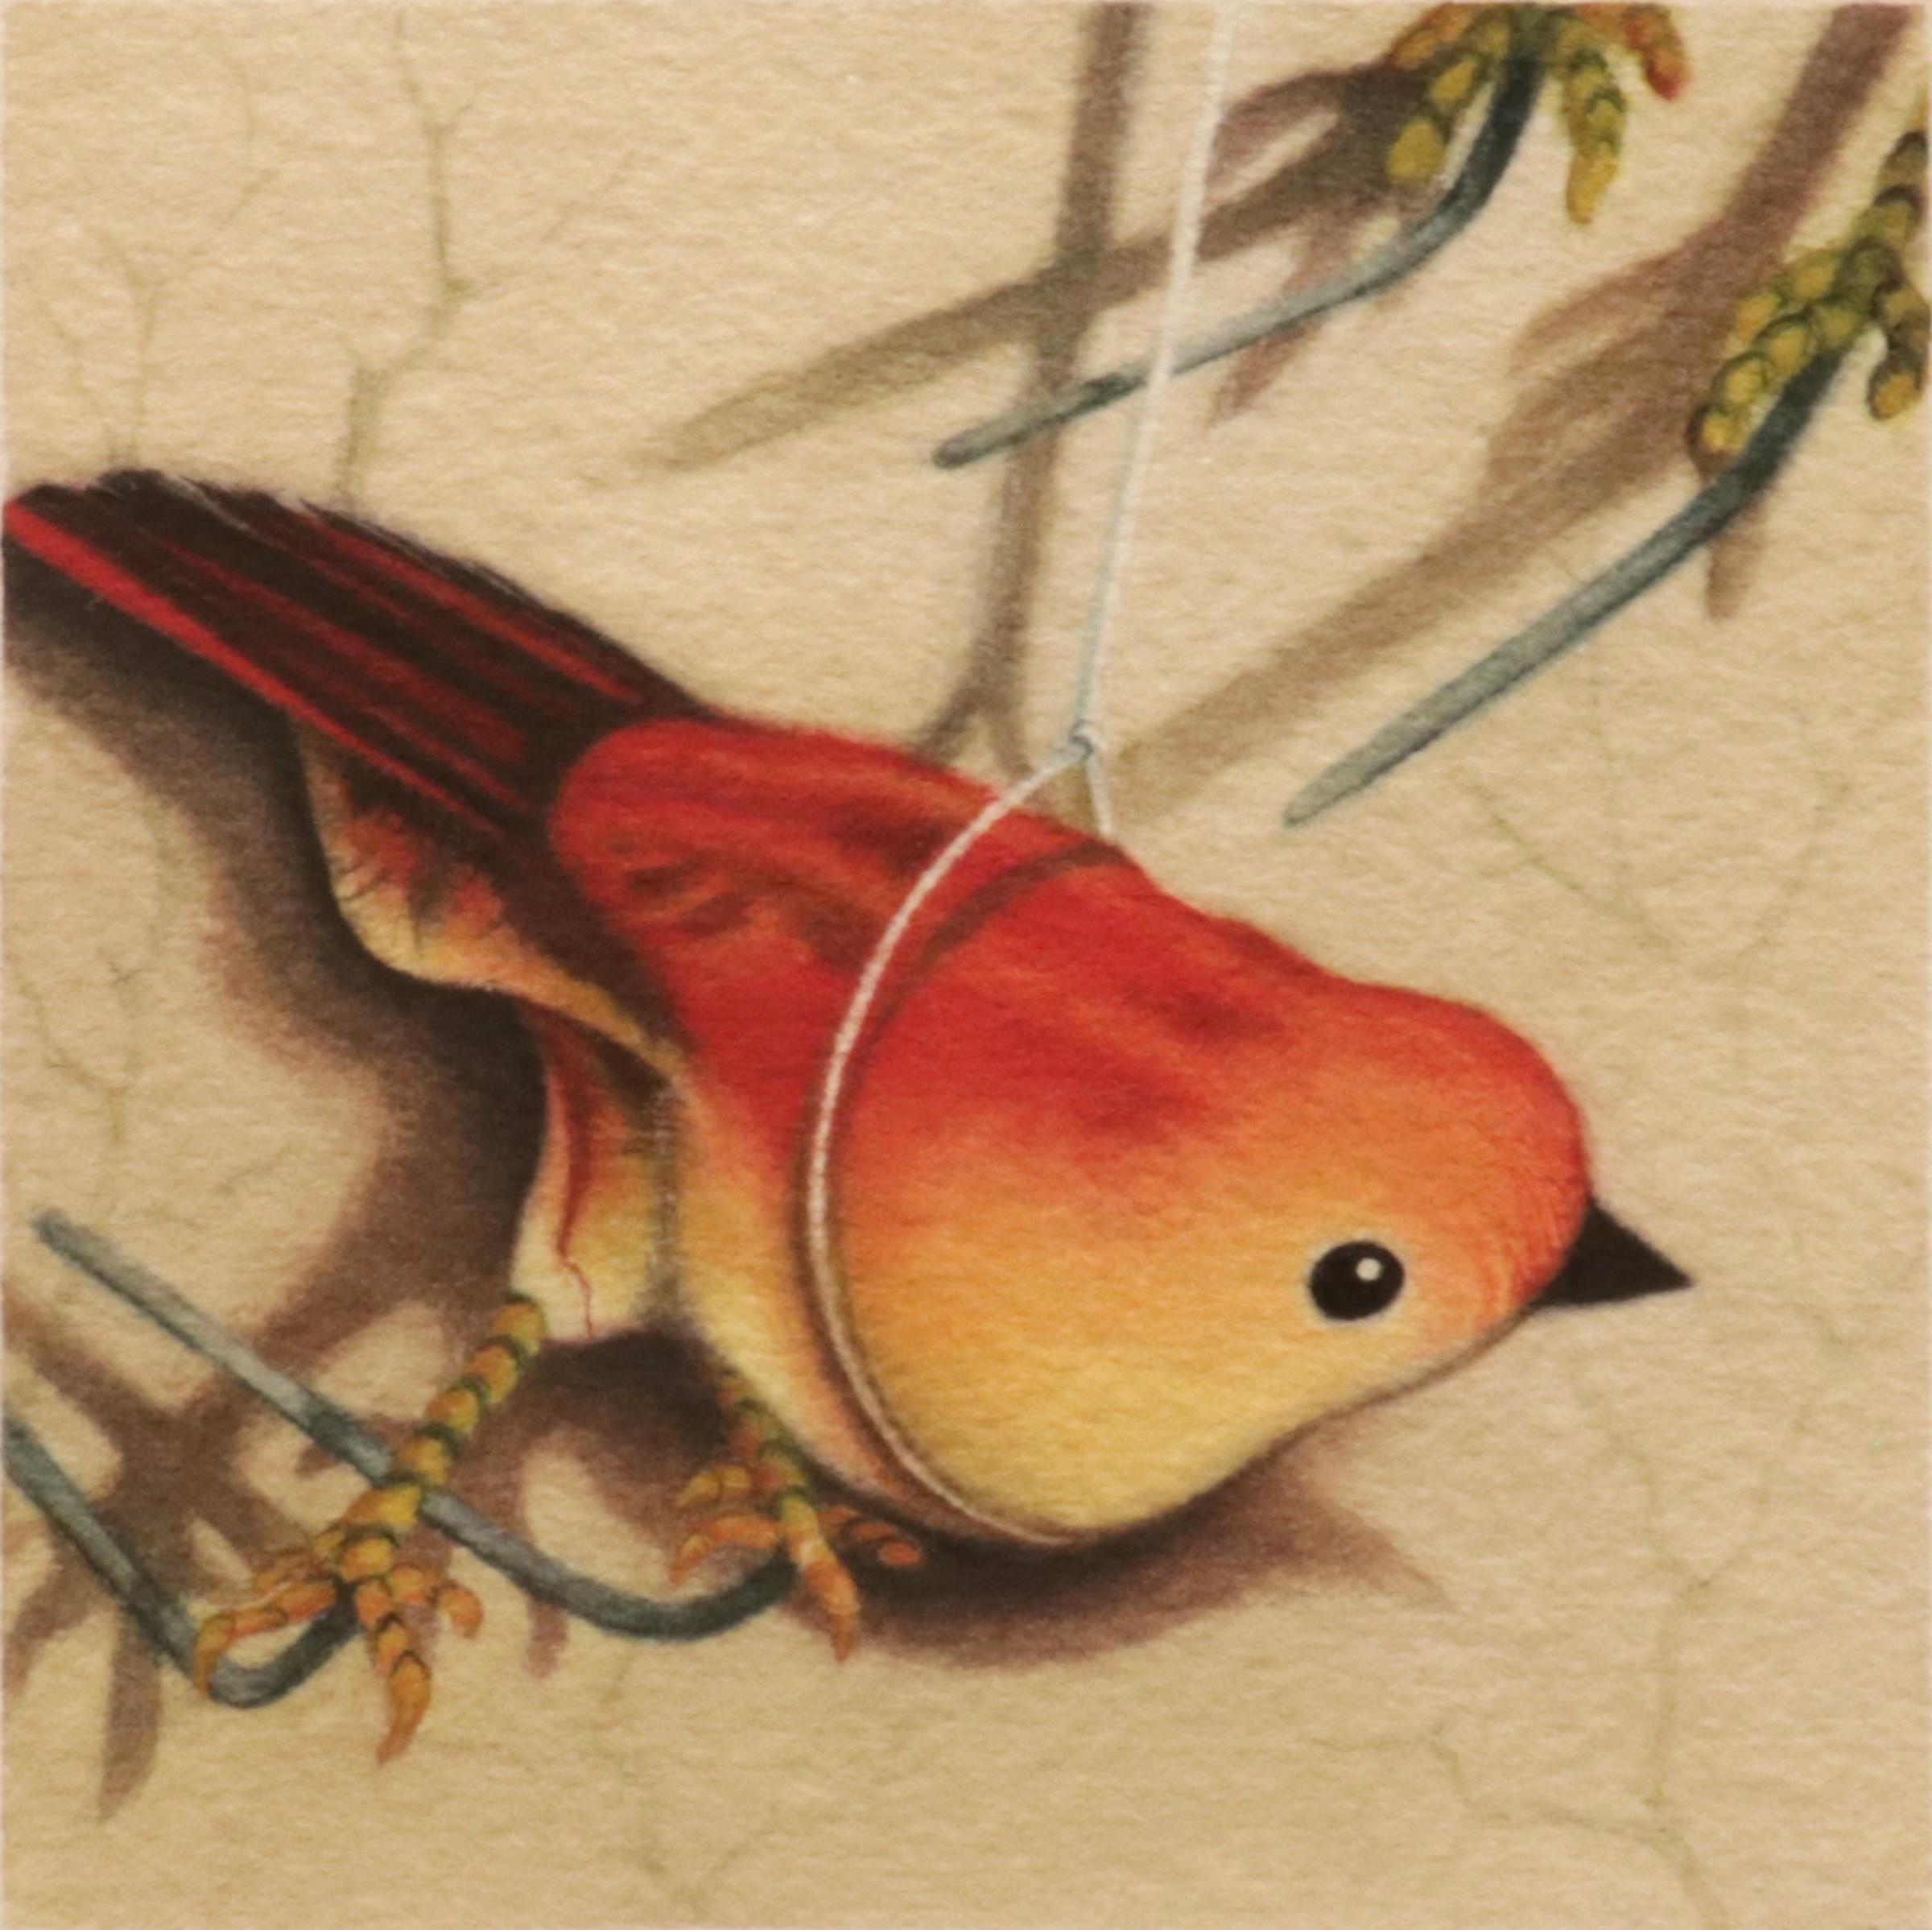 Catherine Means Animal Painting - LONE BIRD #4 - Contemporary Realism / Watercolor / Orange Toy Bird